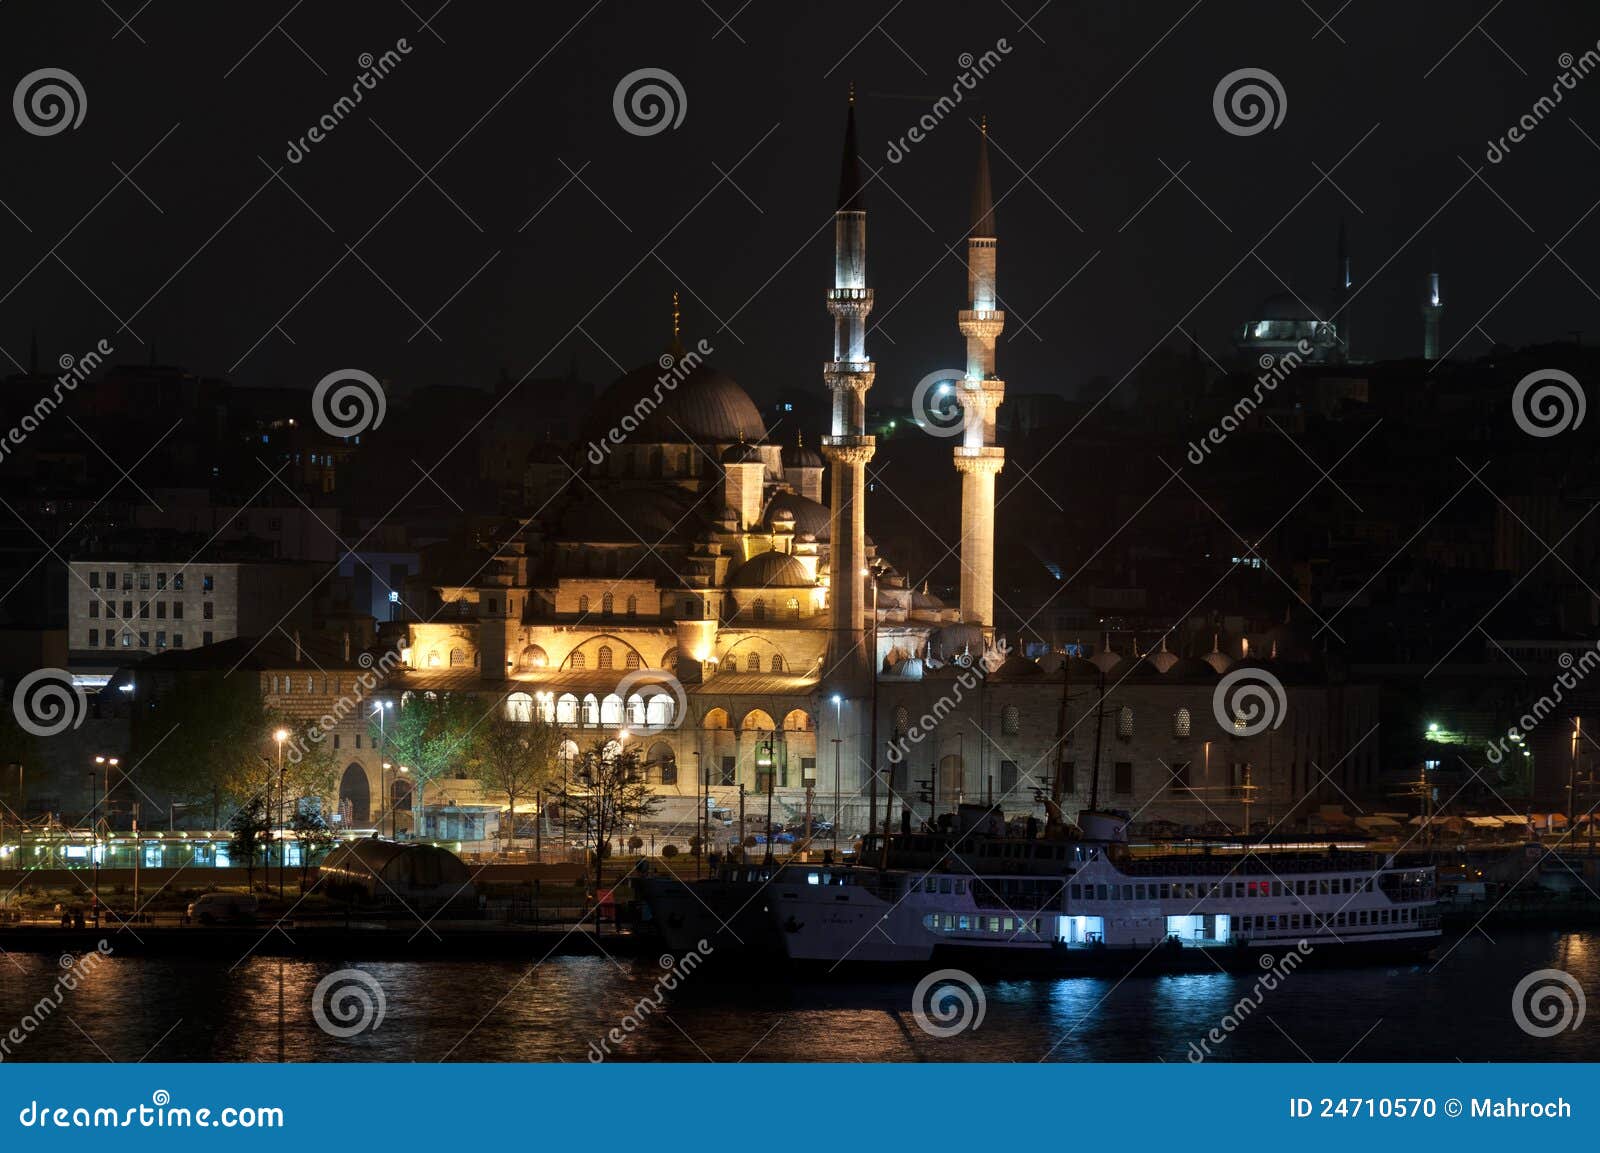 the yeni camii - the new mosque , istanbul, turkey